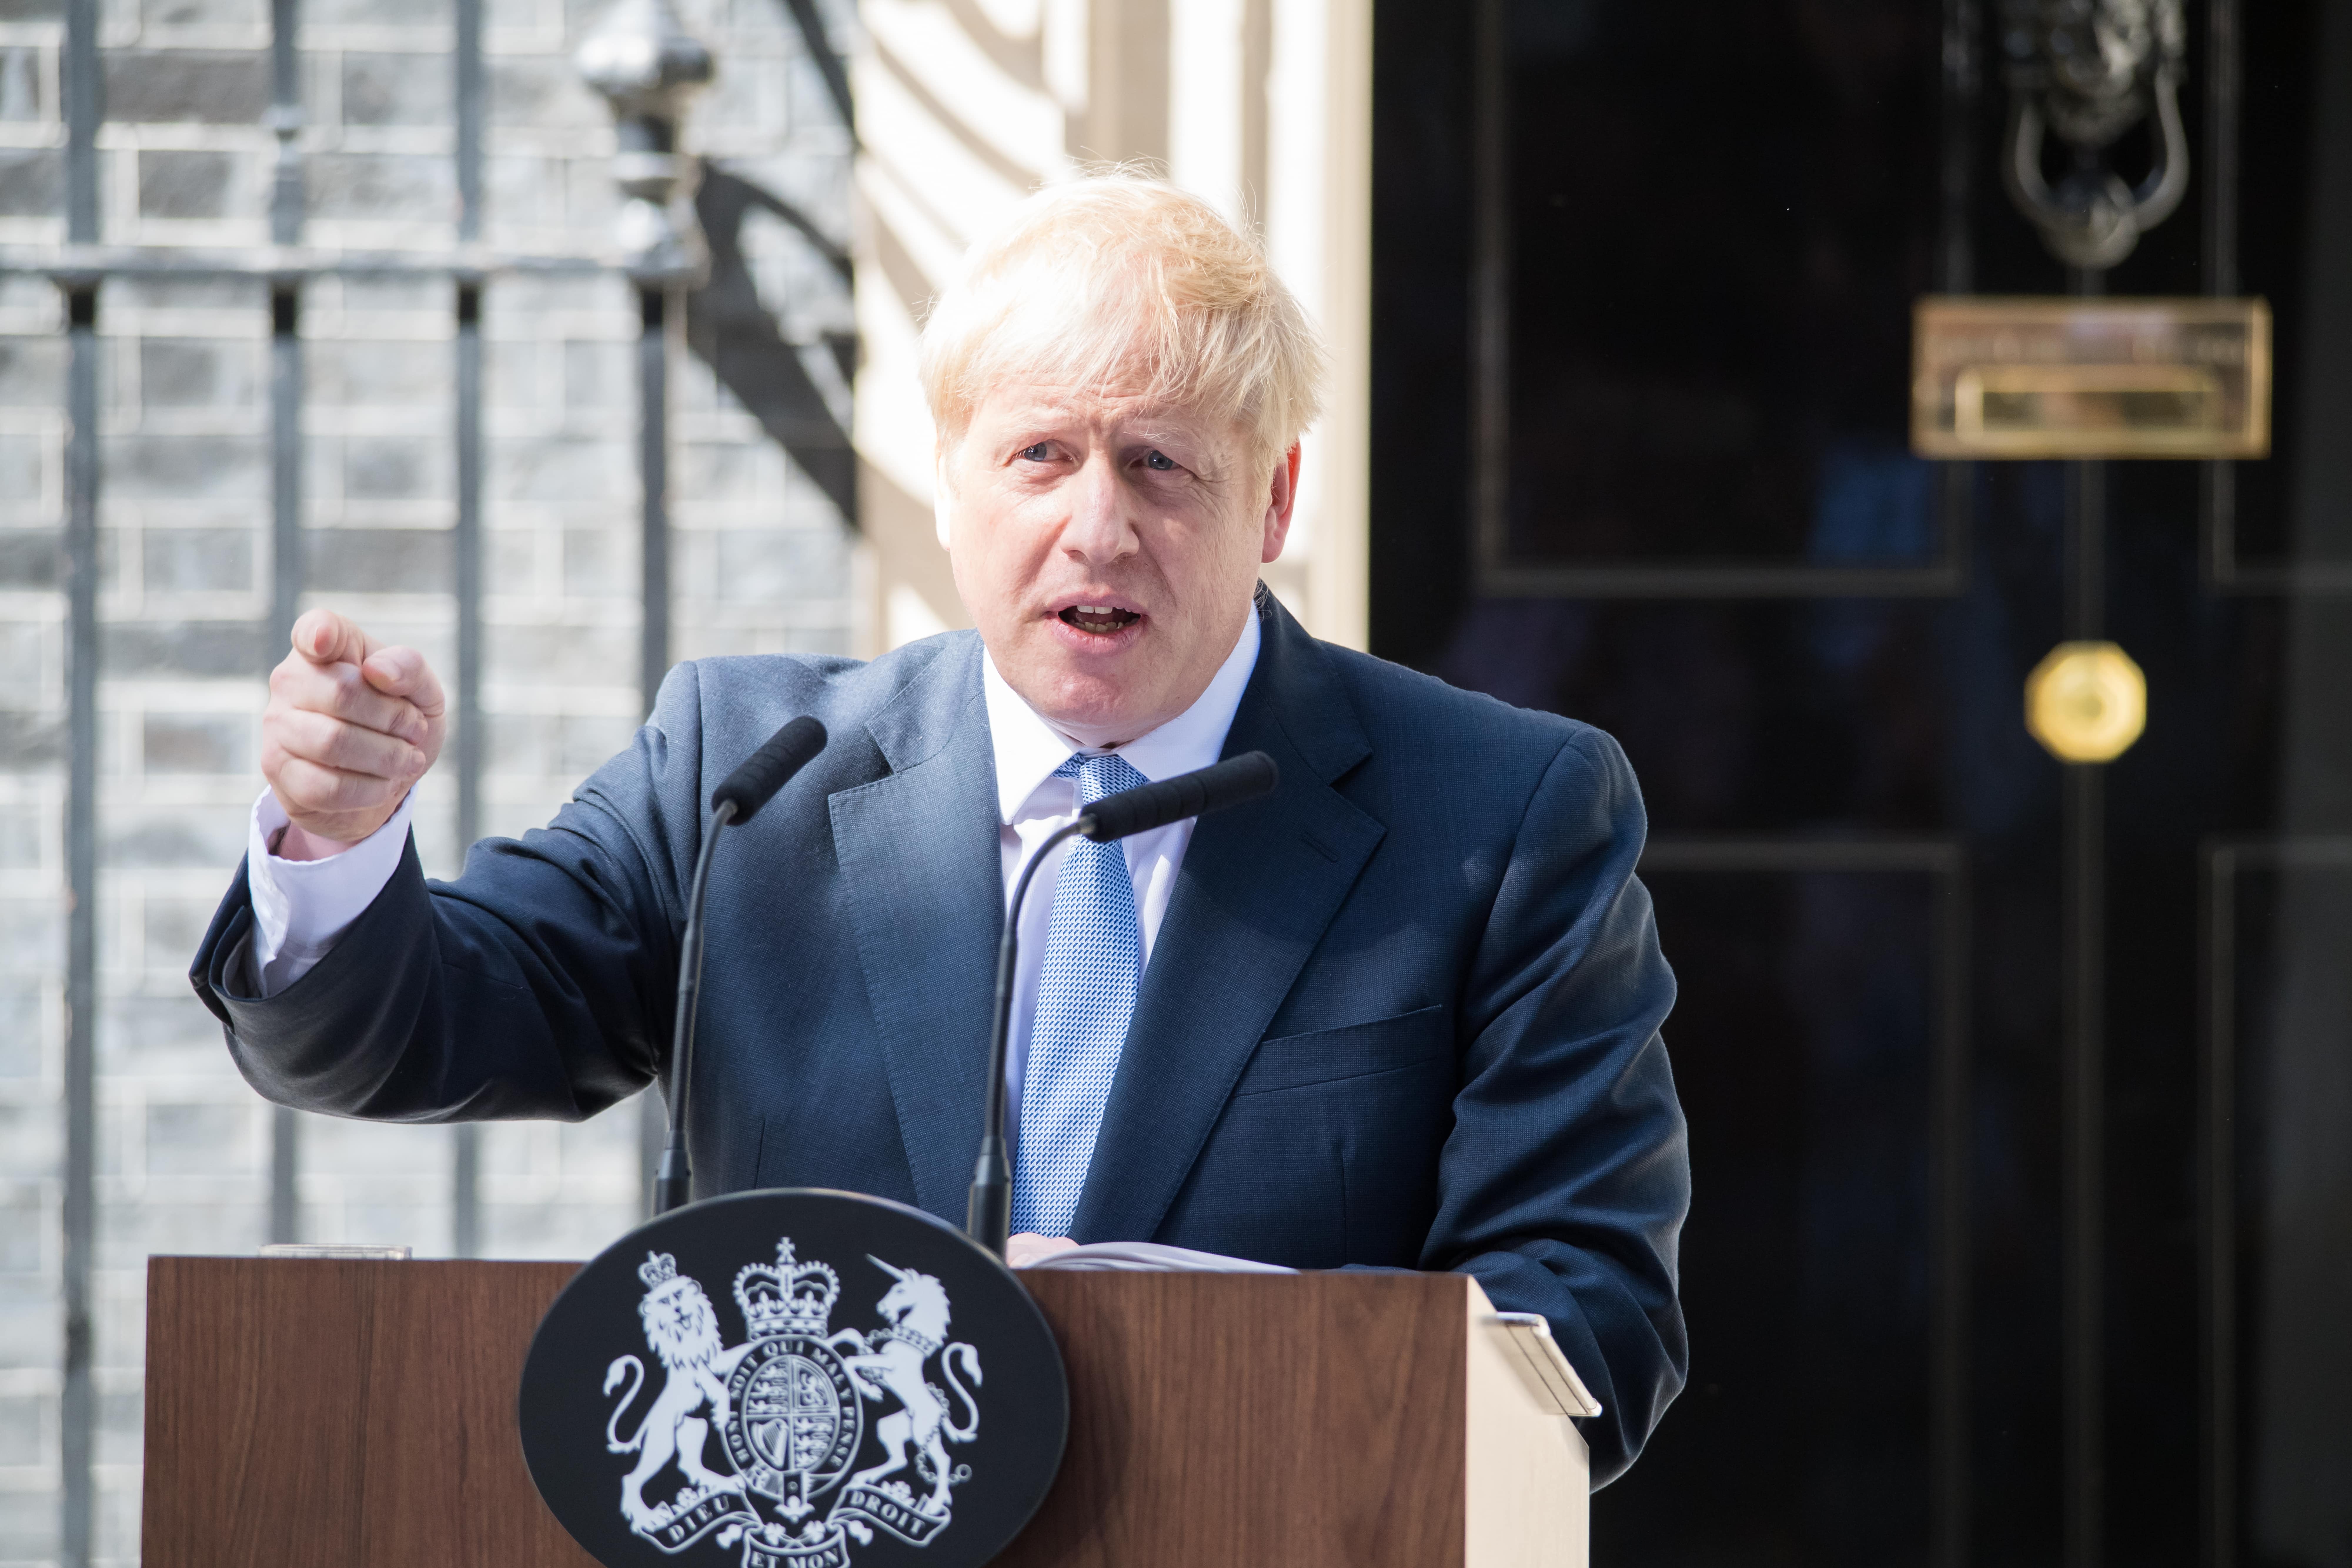 Last week Boris Johnson announced an addition to the UK's ability to attract foreign investment, in the form of an Office for Investment.